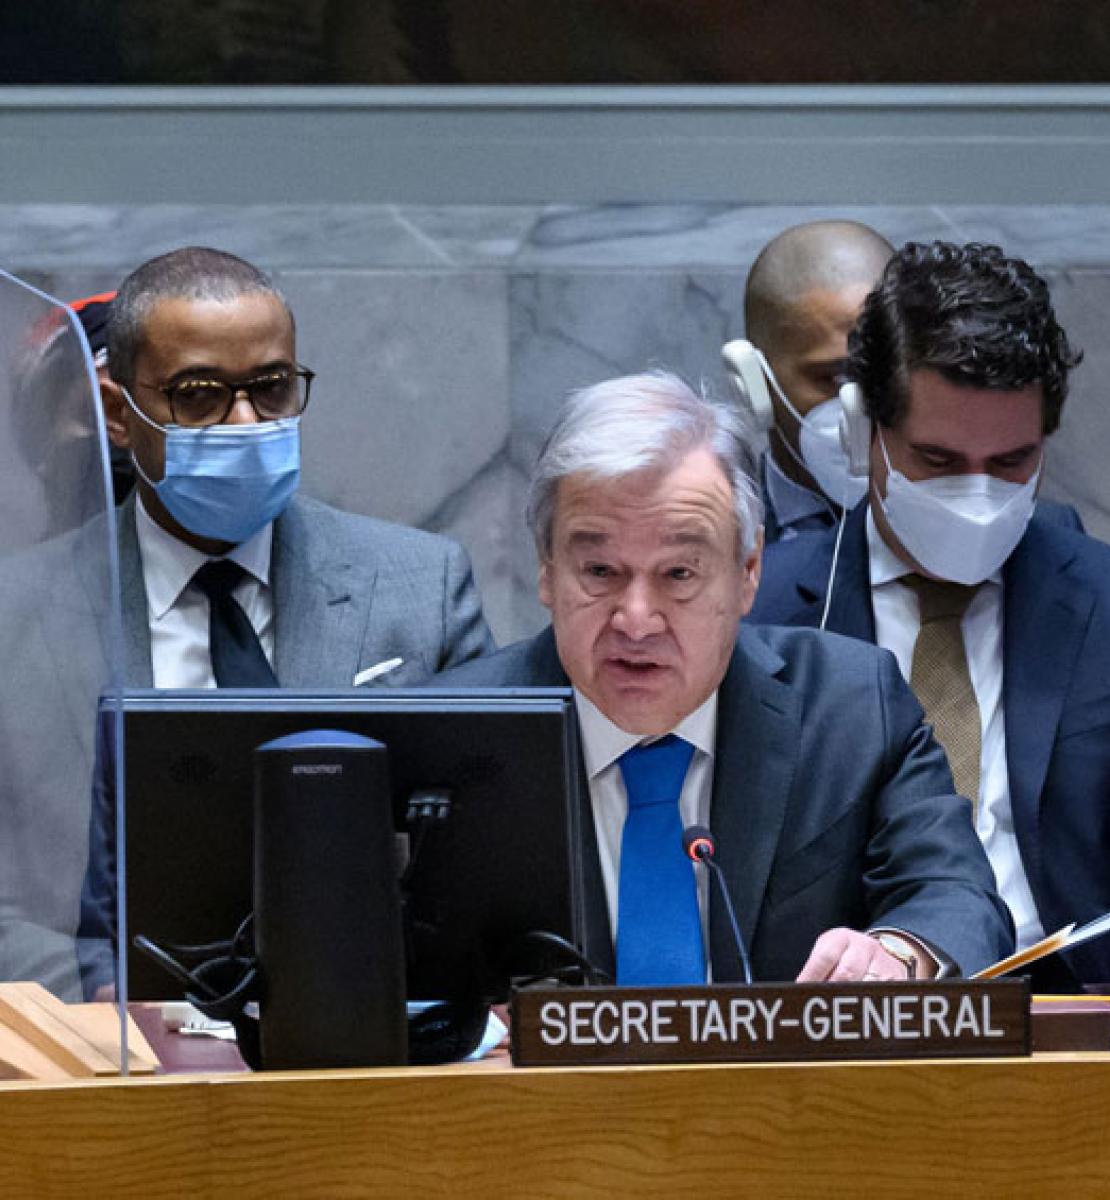 A photo of the UN Secretary General addressing the Security Council.